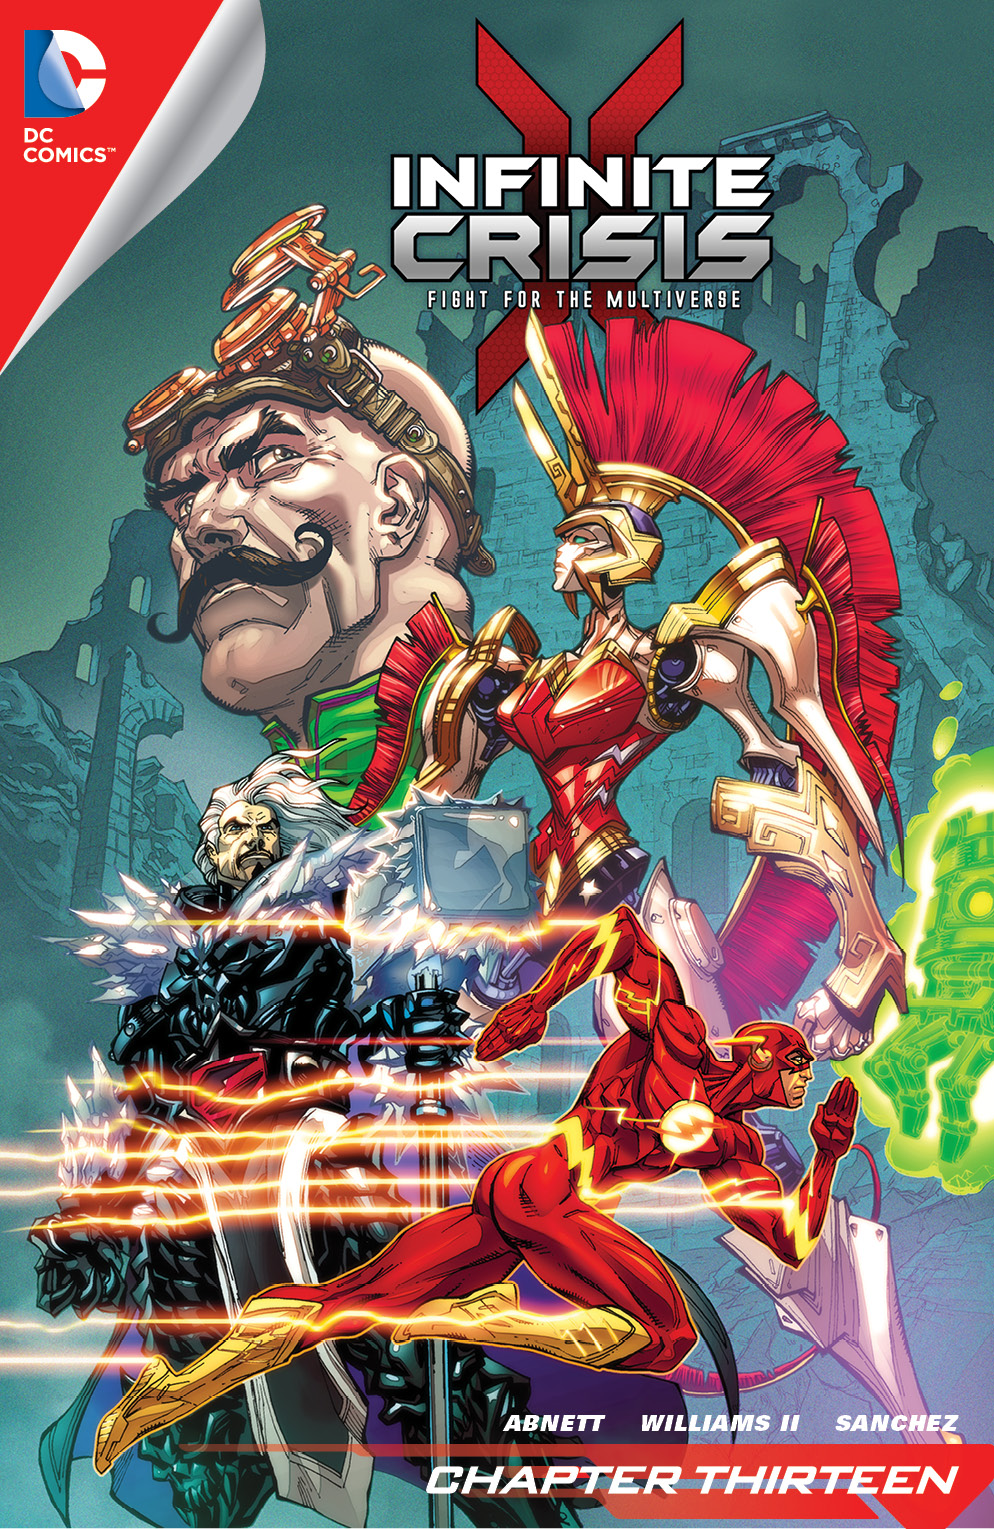 Infinite Crisis: Fight for the Multiverse #13 preview images